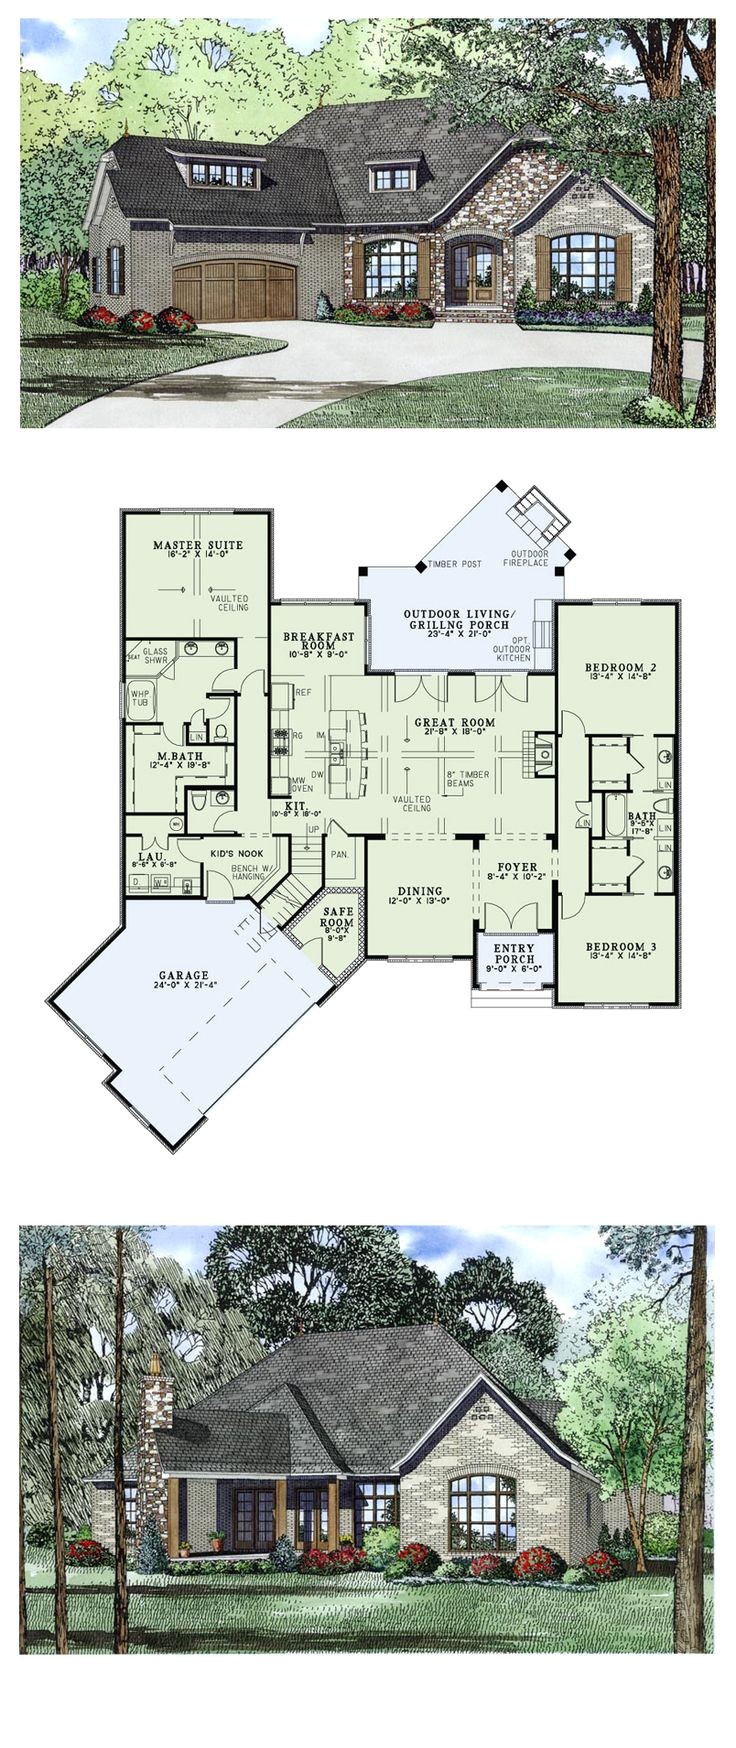 european house plan 82166 total living area 2408 sq ft 3 bedrooms 2 5 bathrooms floorplan europeanstyle newconstruction